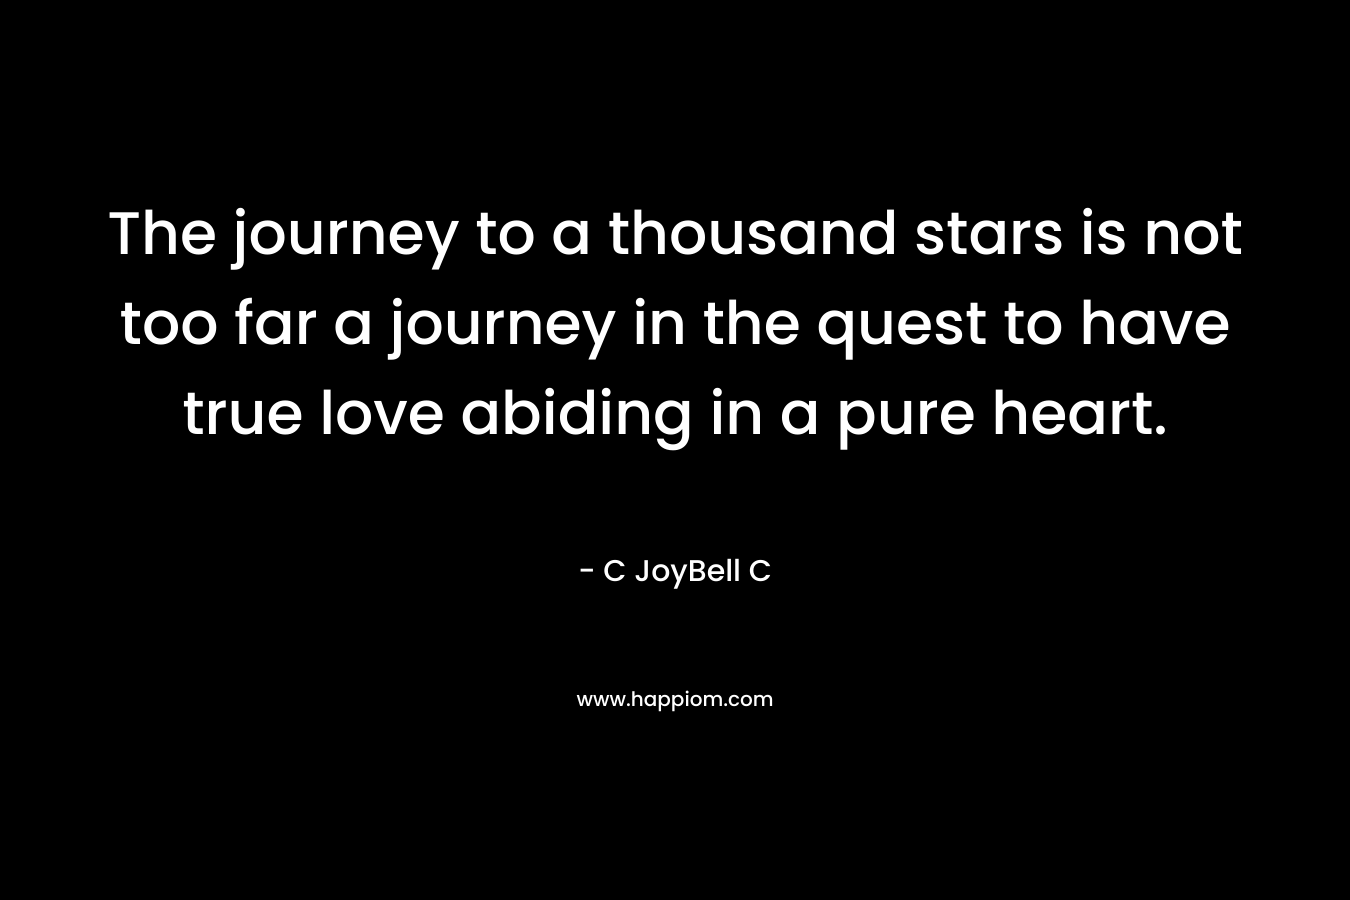 The journey to a thousand stars is not too far a journey in the quest to have true love abiding in a pure heart. – C JoyBell C